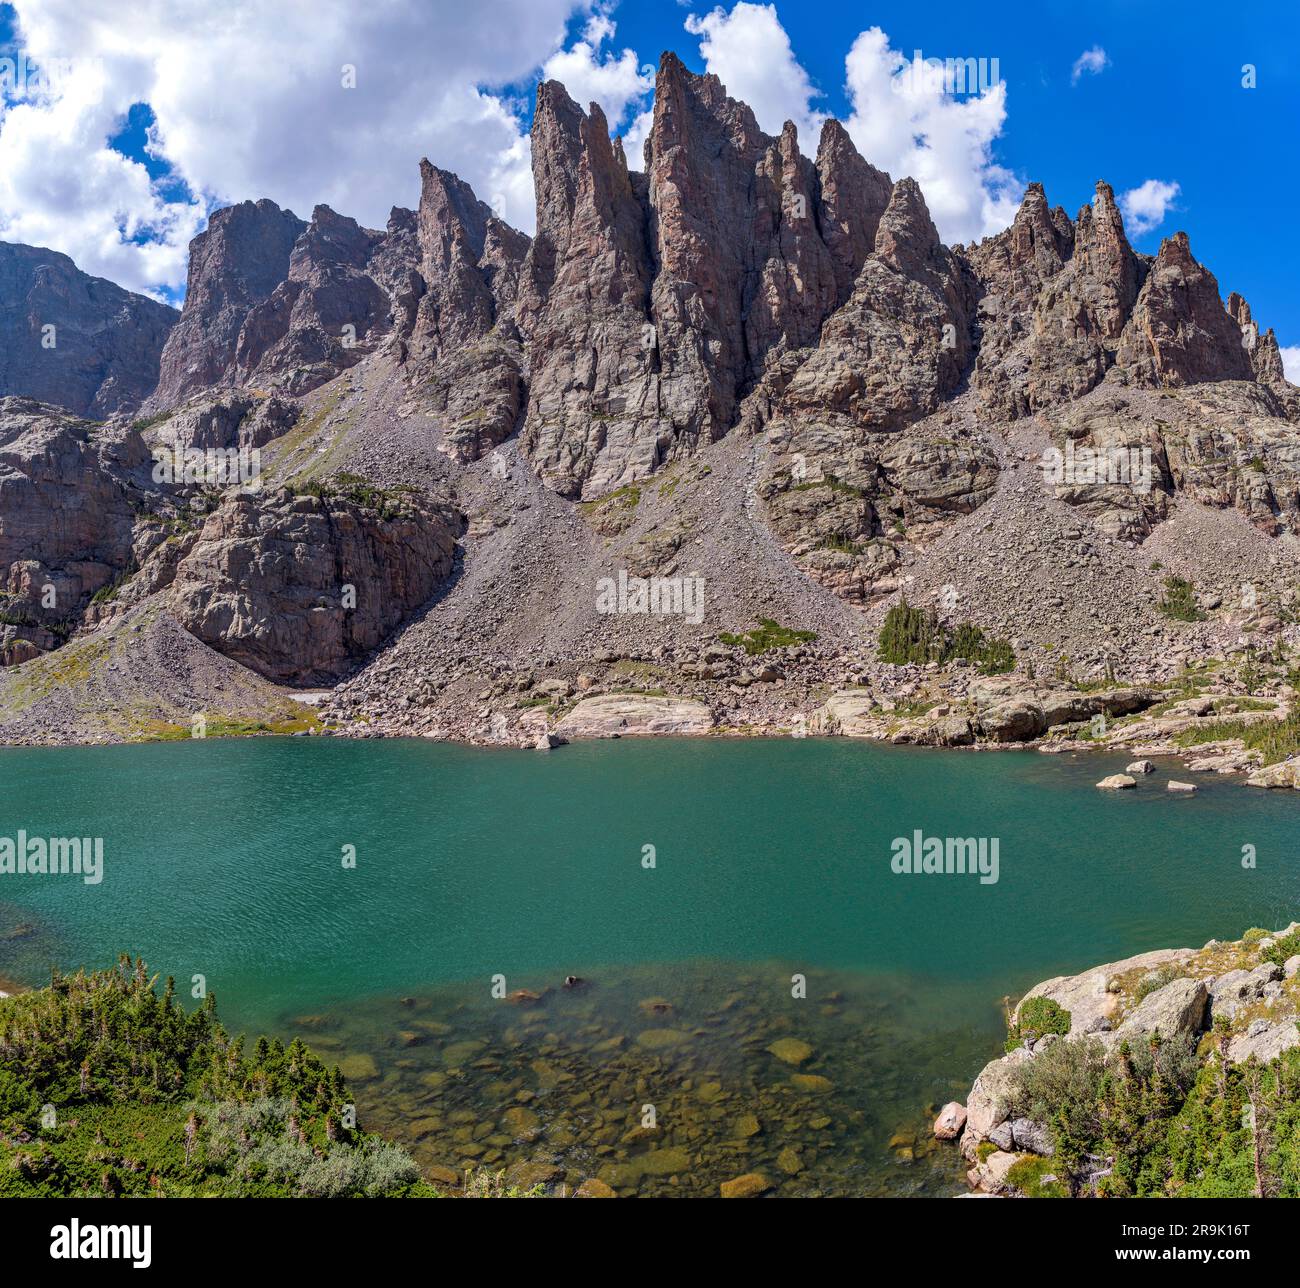 Sky Pond and Sharkstooth - A sunny Summer day view of clear and colorful Sky Pond, with rugged pinnacles of Sharkstooth towering at shore. RMNP, CO. Stock Photo